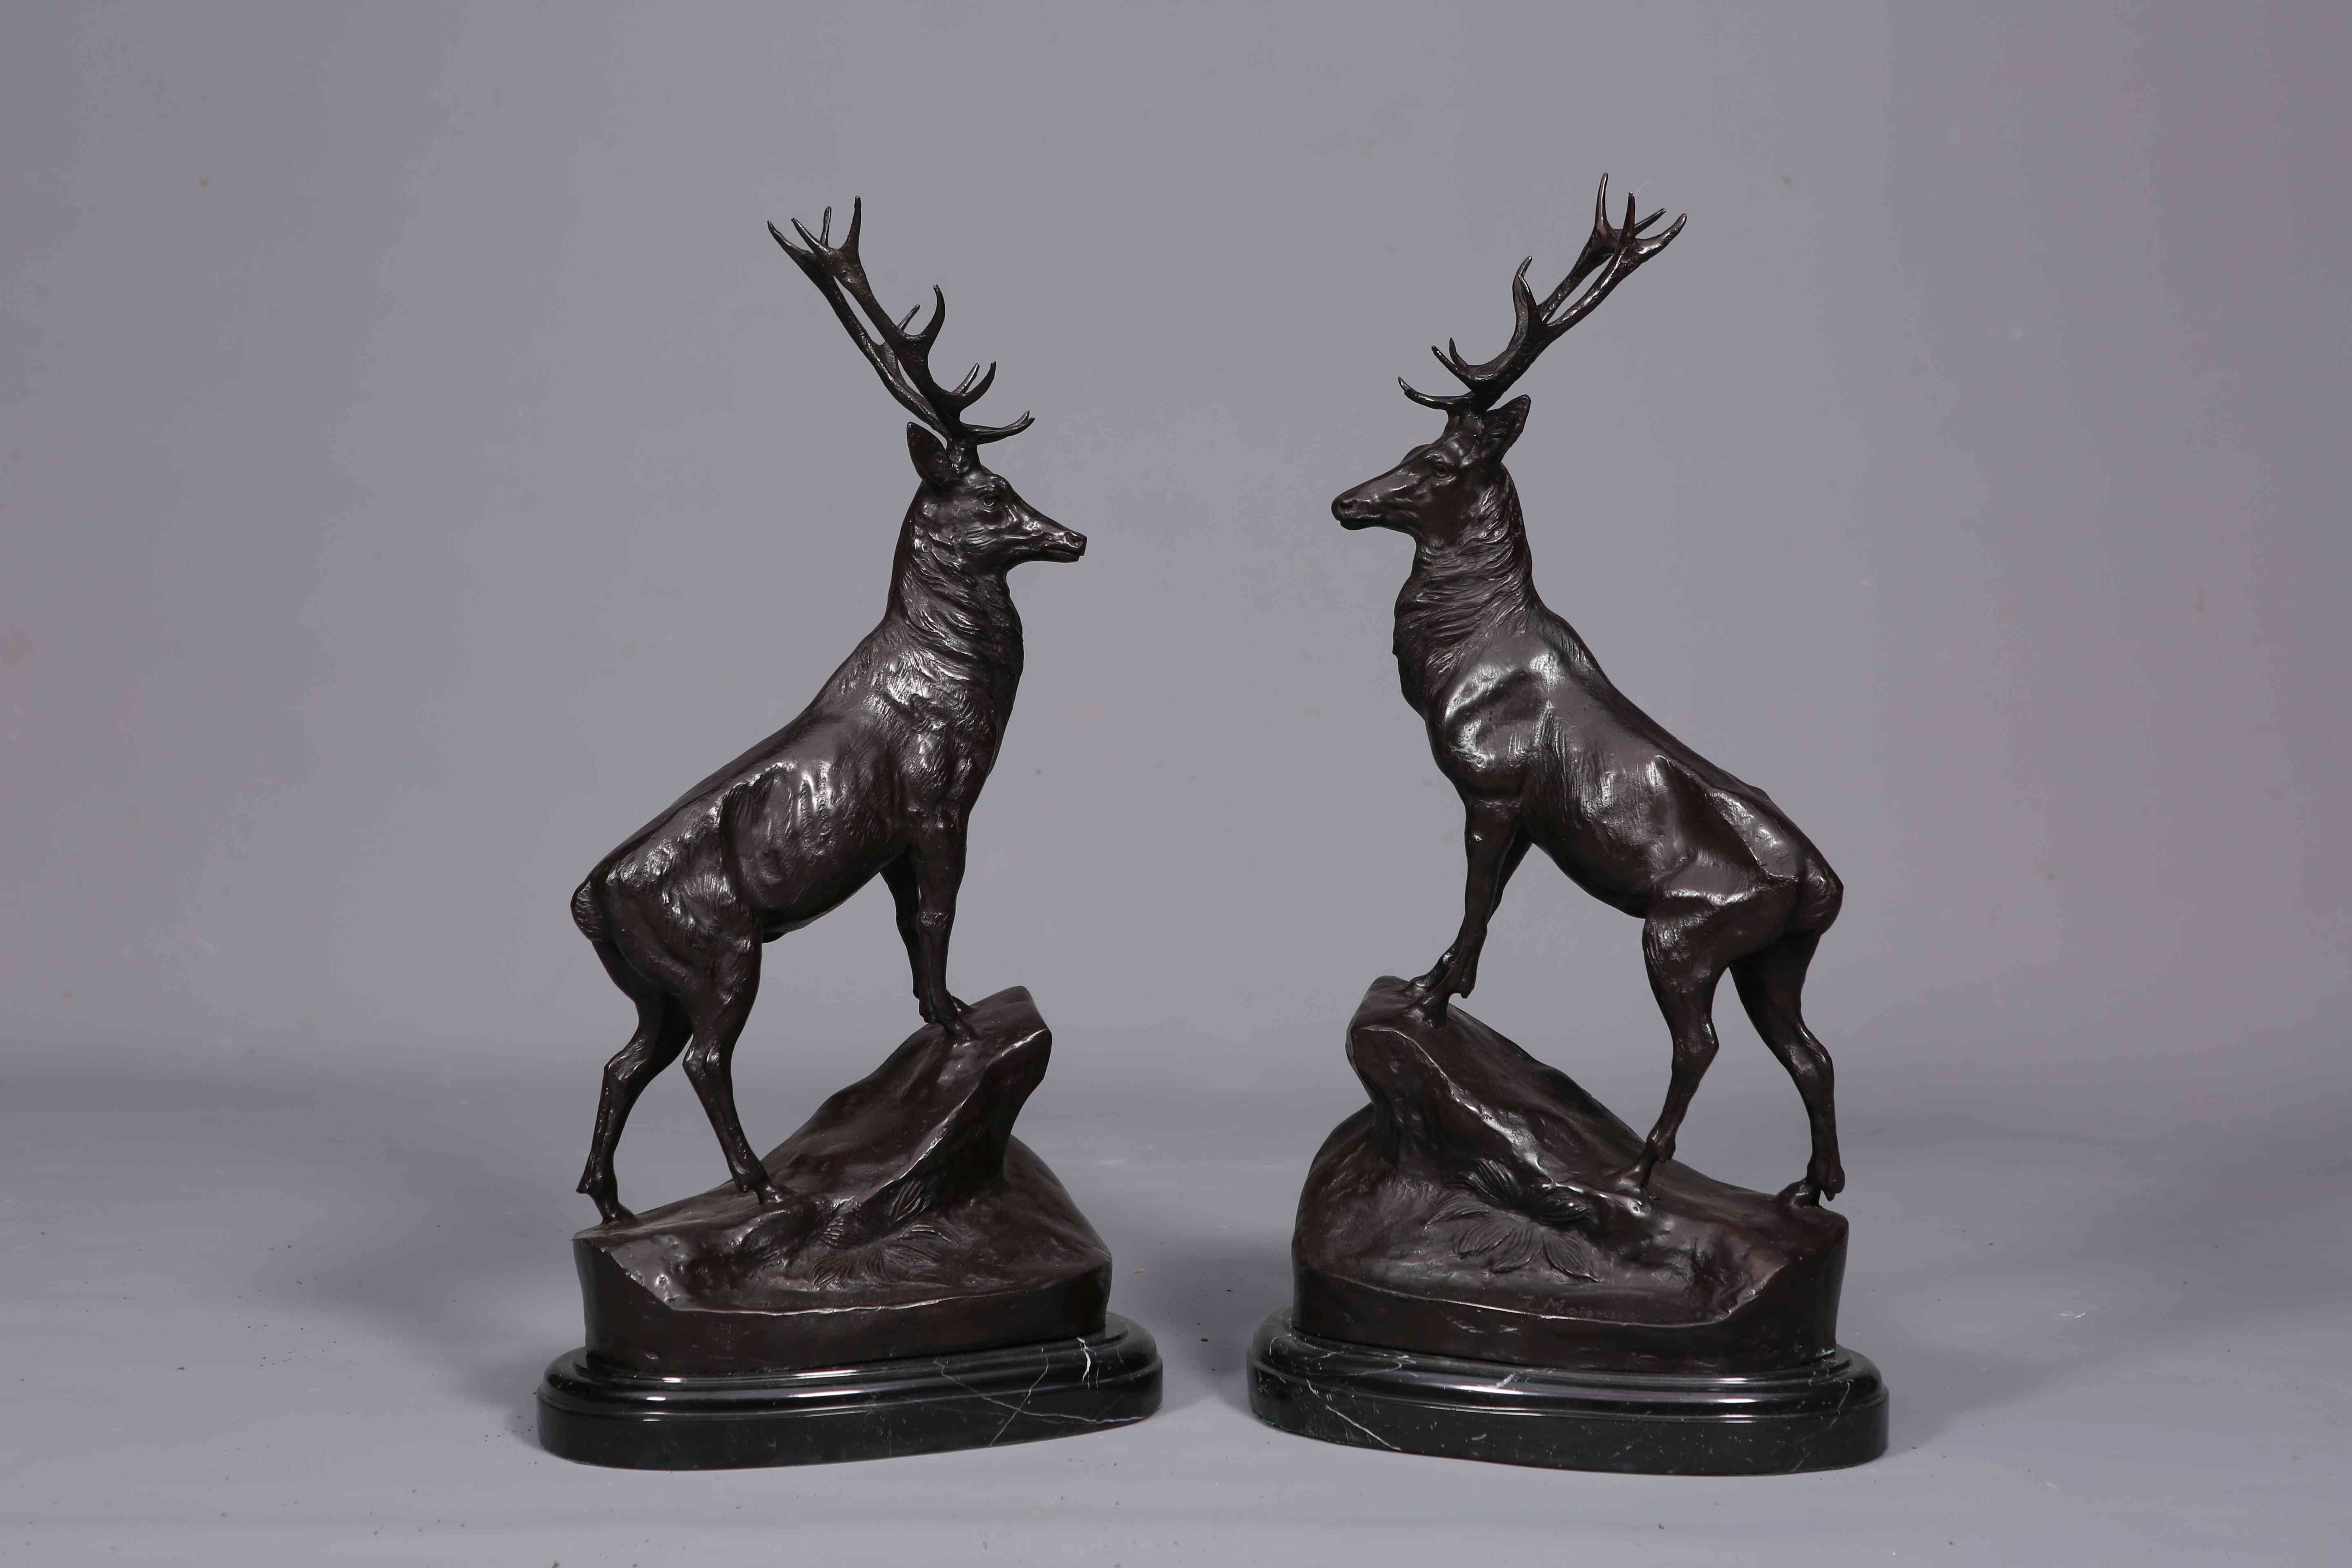 A LARGE PAIR OF BRONZE STAGS, each cast standing on a rocky outcrop. 73.